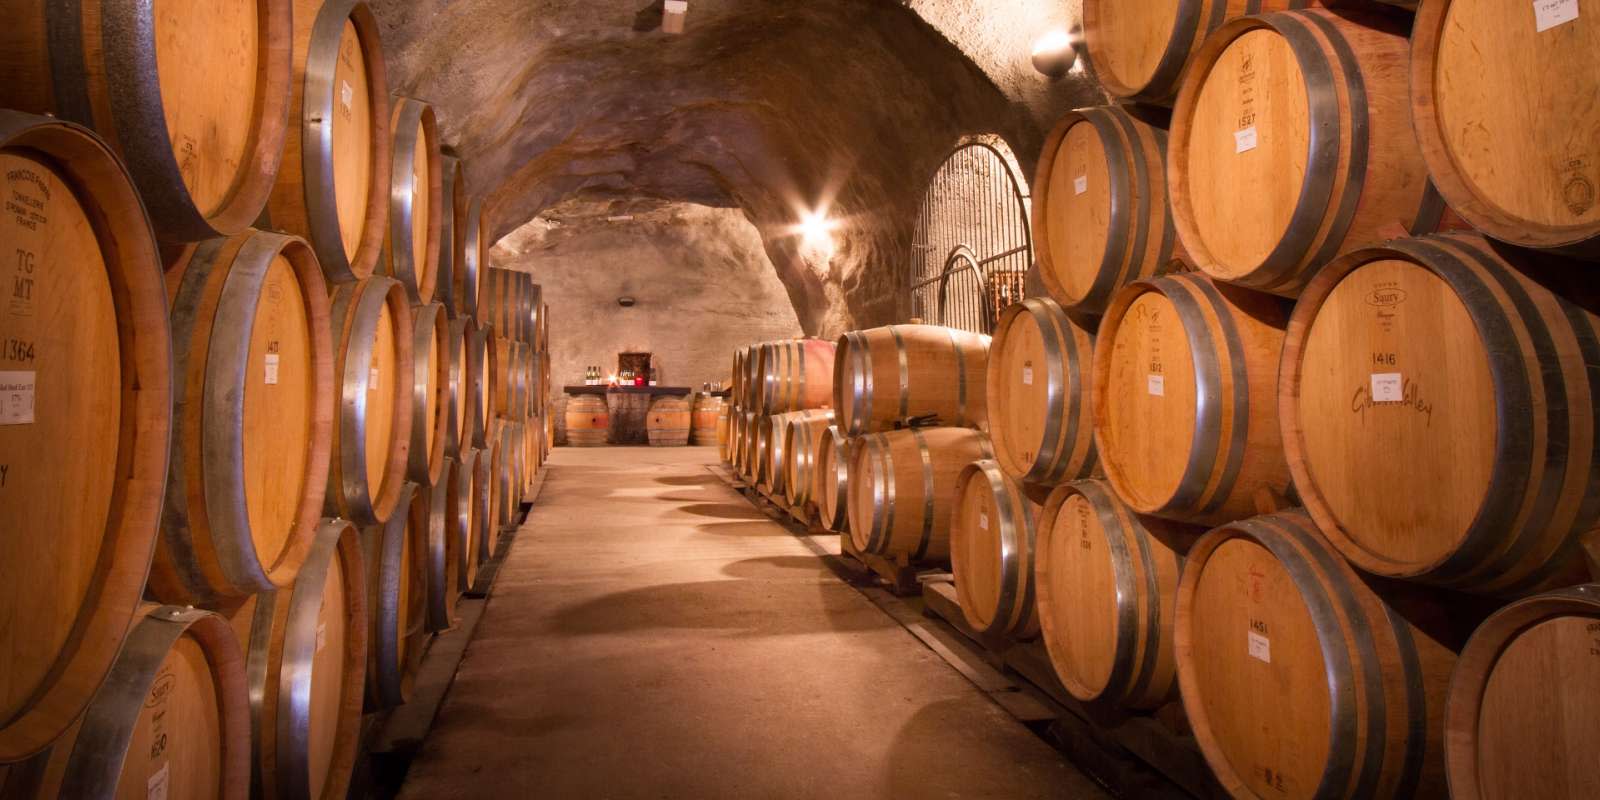 Experience New Zealand's largest wine cave